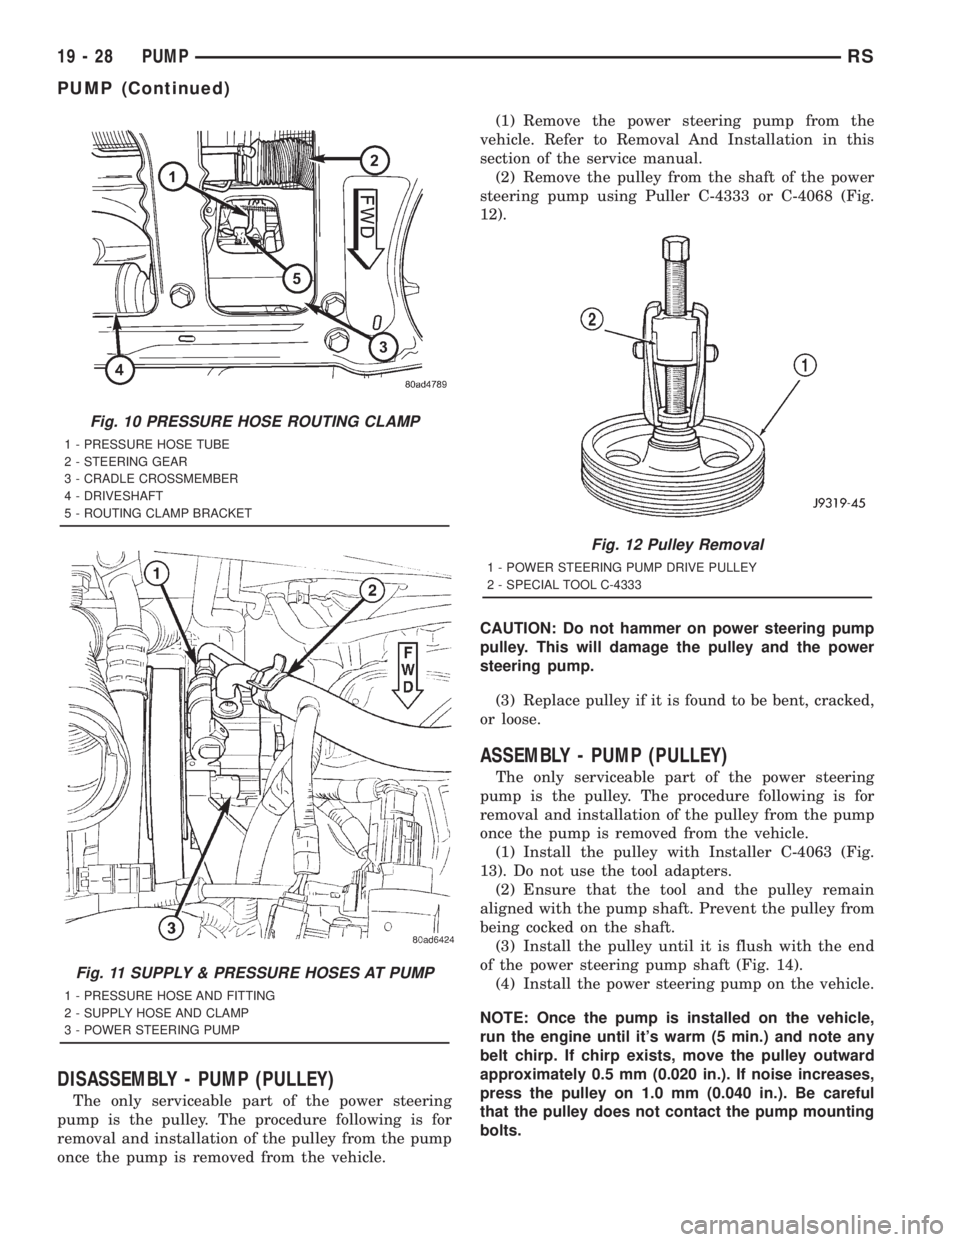 CHRYSLER VOYAGER 2001  Service Manual DISASSEMBLY - PUMP (PULLEY)
The only serviceable part of the power steering
pump is the pulley. The procedure following is for
removal and installation of the pulley from the pump
once the pump is rem